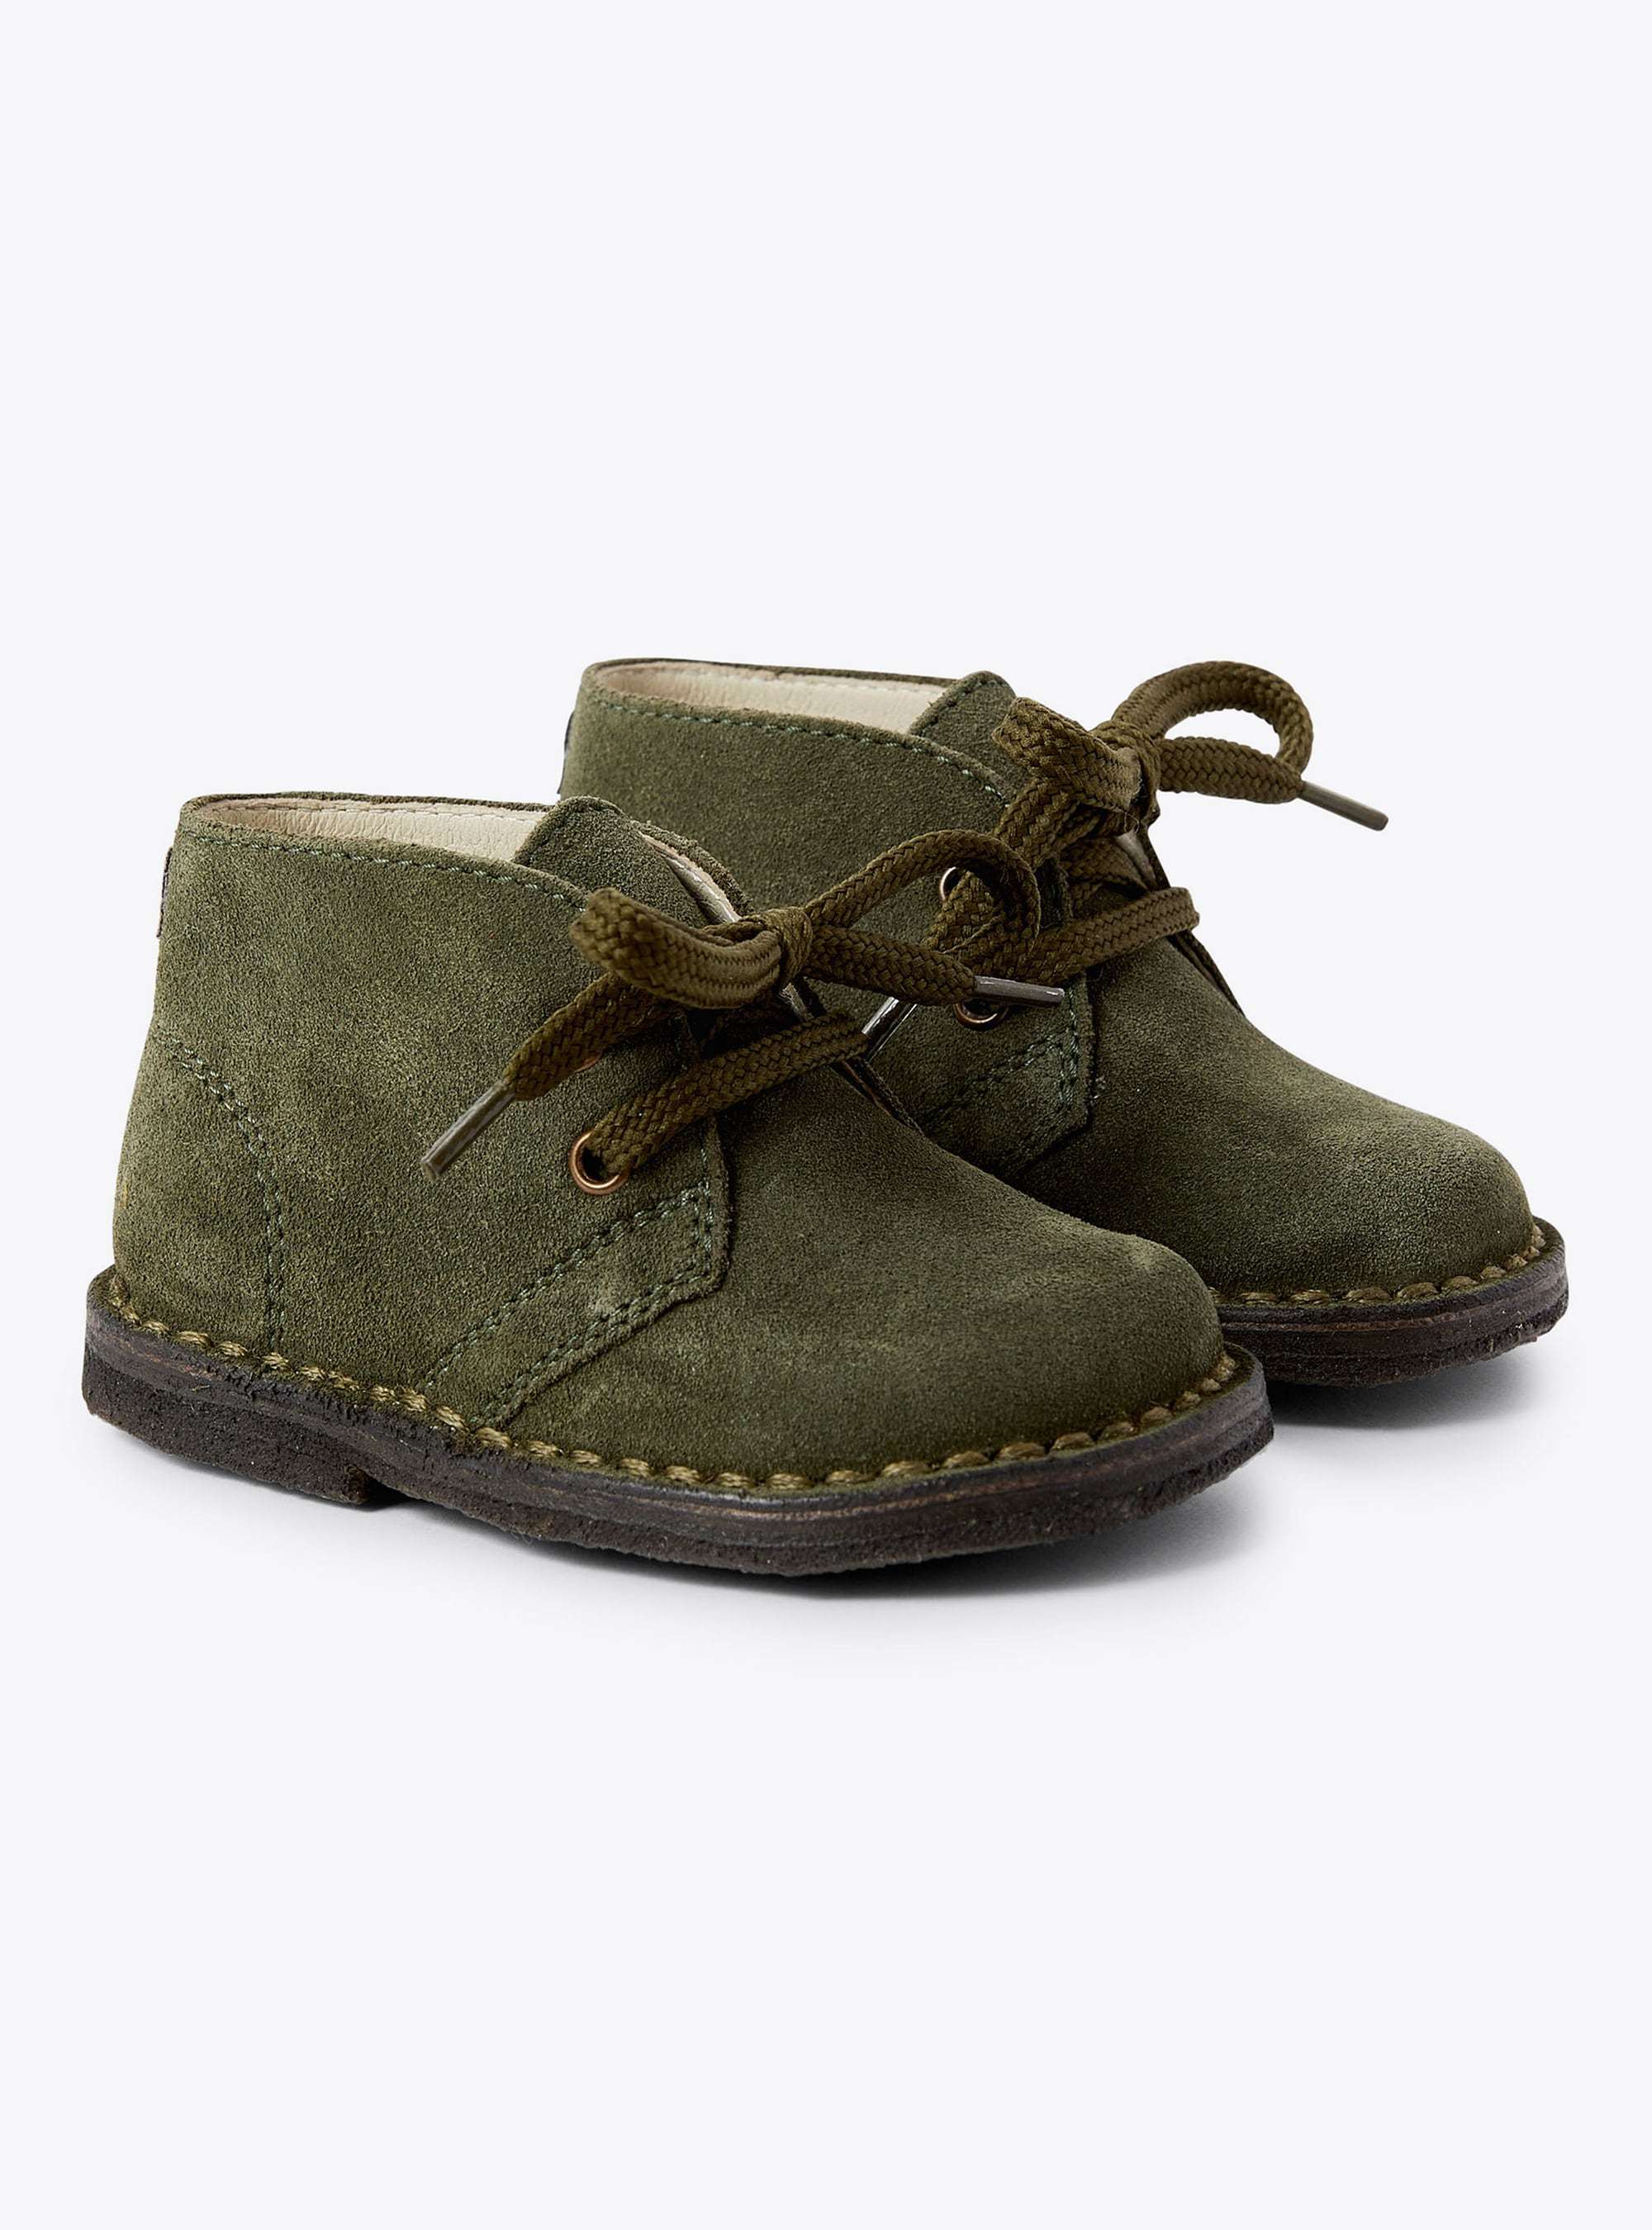 Green suede baby shoes - Shoes - Il Gufo